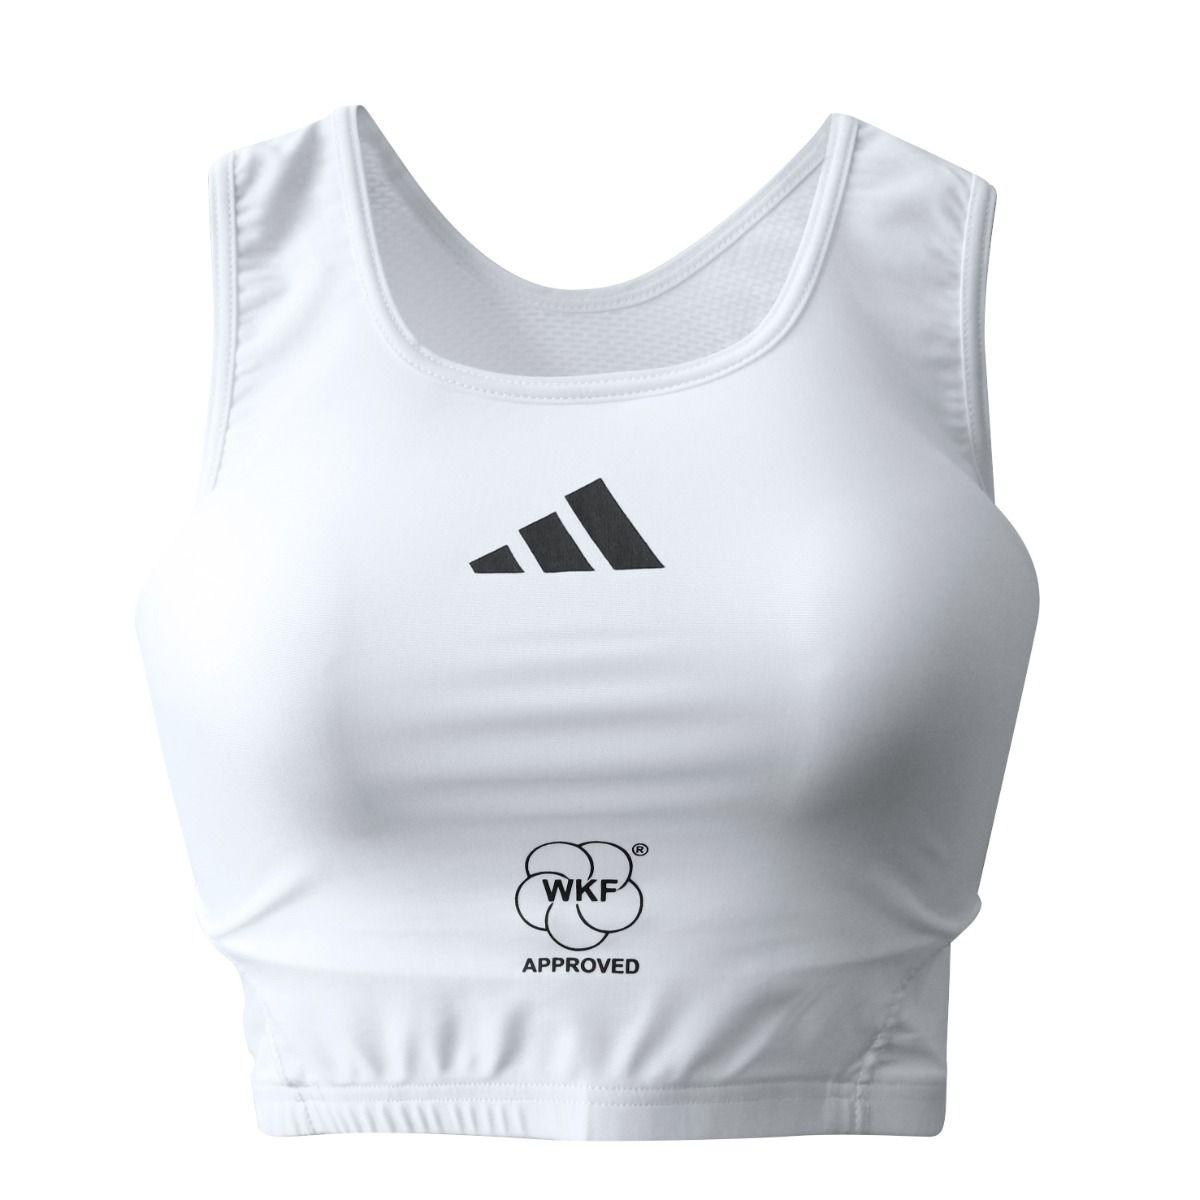 ADIDAS WKF APPROVED FEMALE CHEST PROTECTOR - RINGMASTER SPORTS - Made For Champions